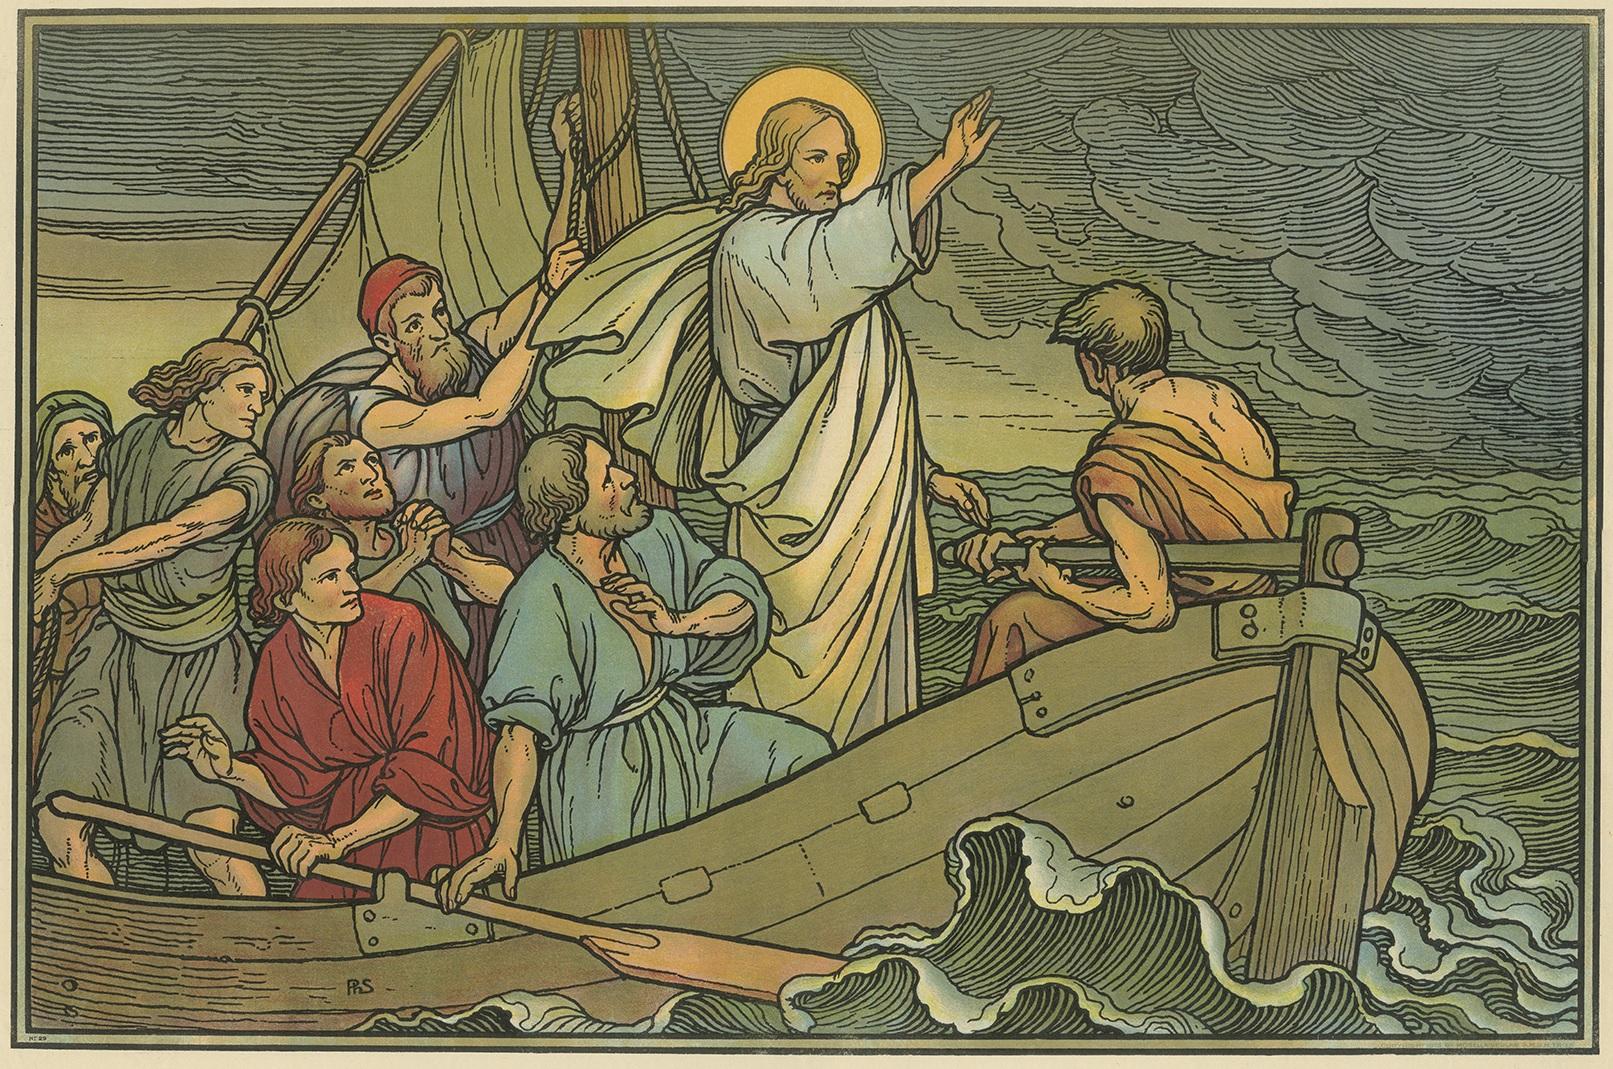 Large antique print of Christ at the Sea of Galilee. Published by Mosella-Verlag, 1913. This print originates from a series titled 'Kathol. Schulbibelwerk von Dr. Ecker'.